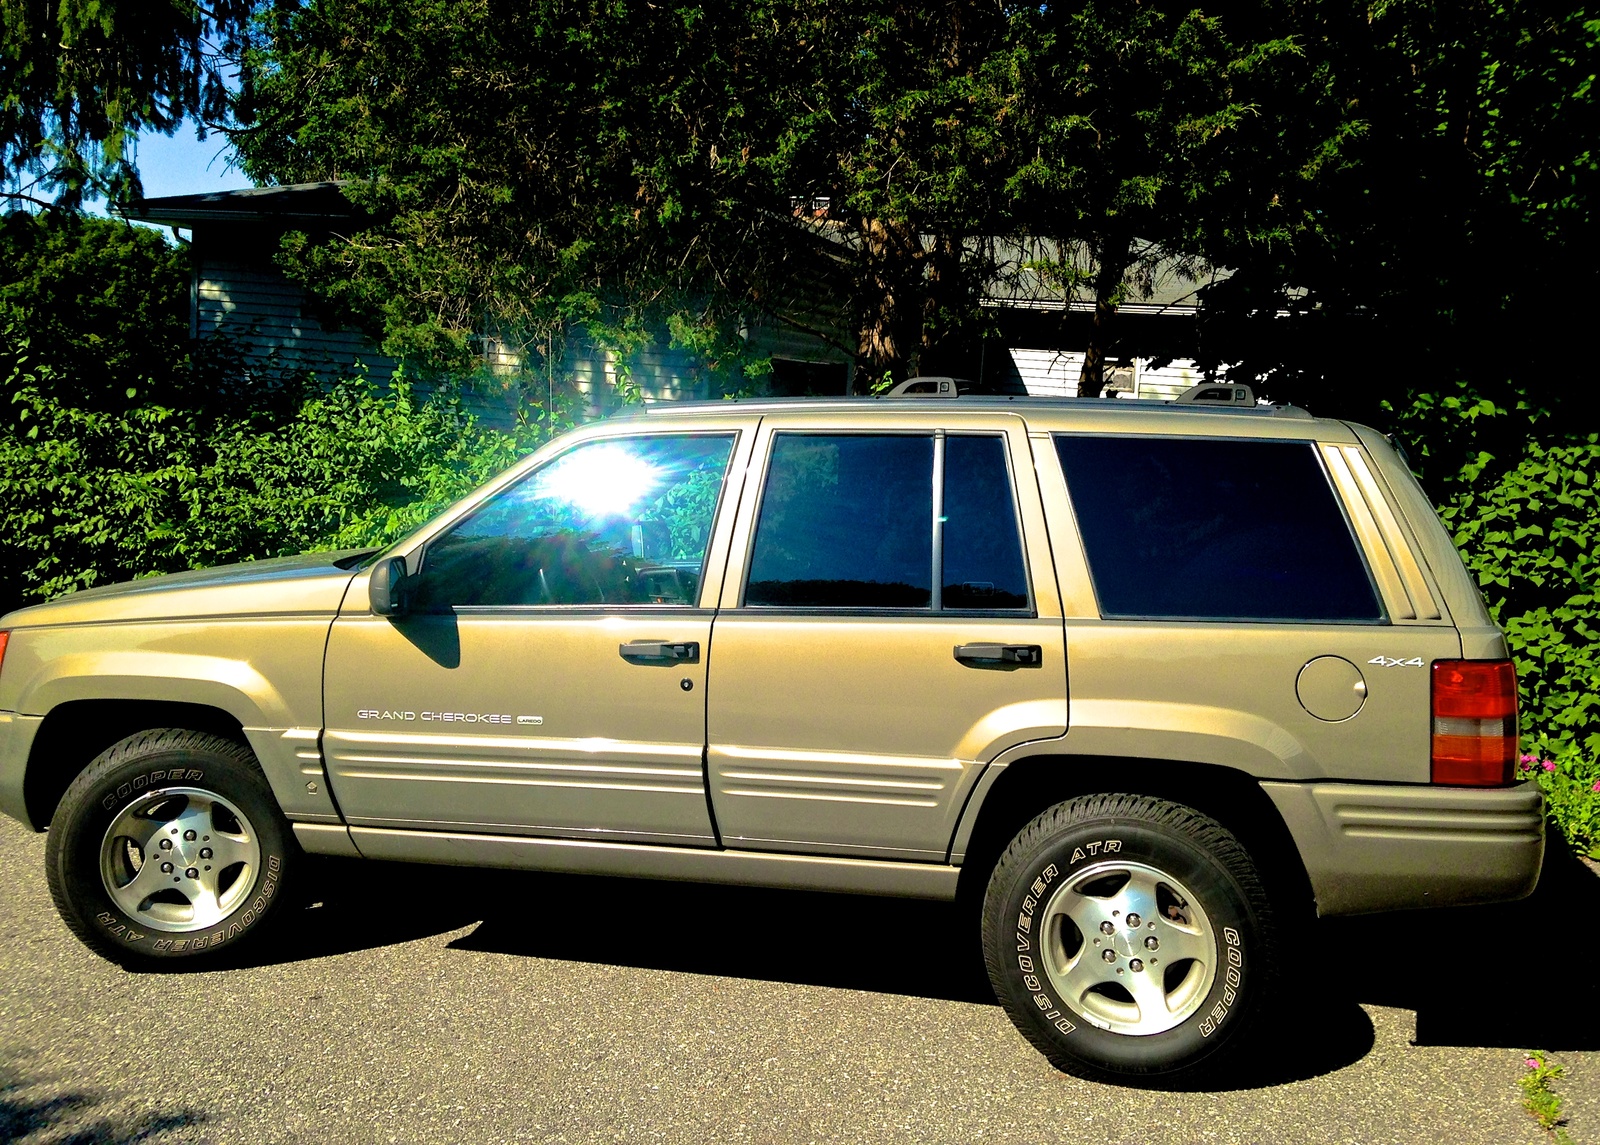 1998 Ford explorer limited edition specs #1